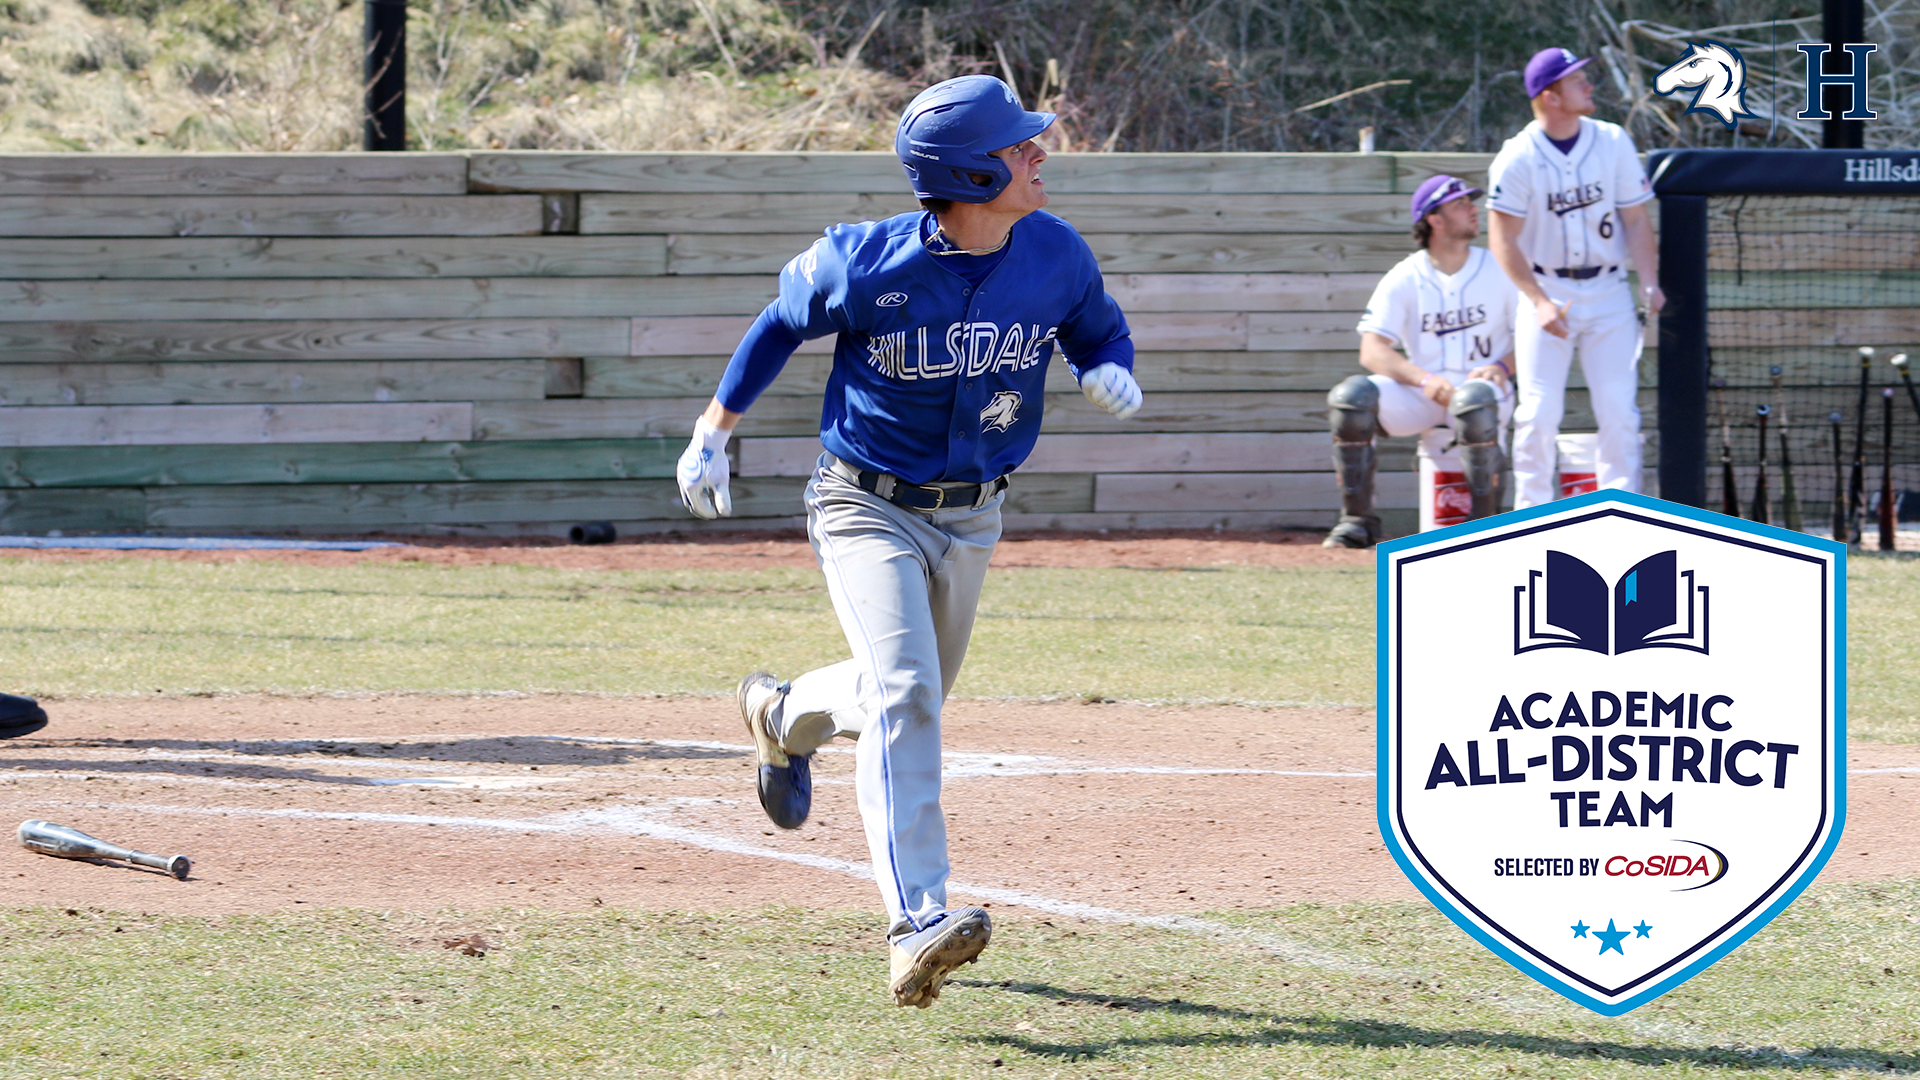 Lewis Beals earns Charger baseball team's first CoSIDA Academic All-District honor in over two decades